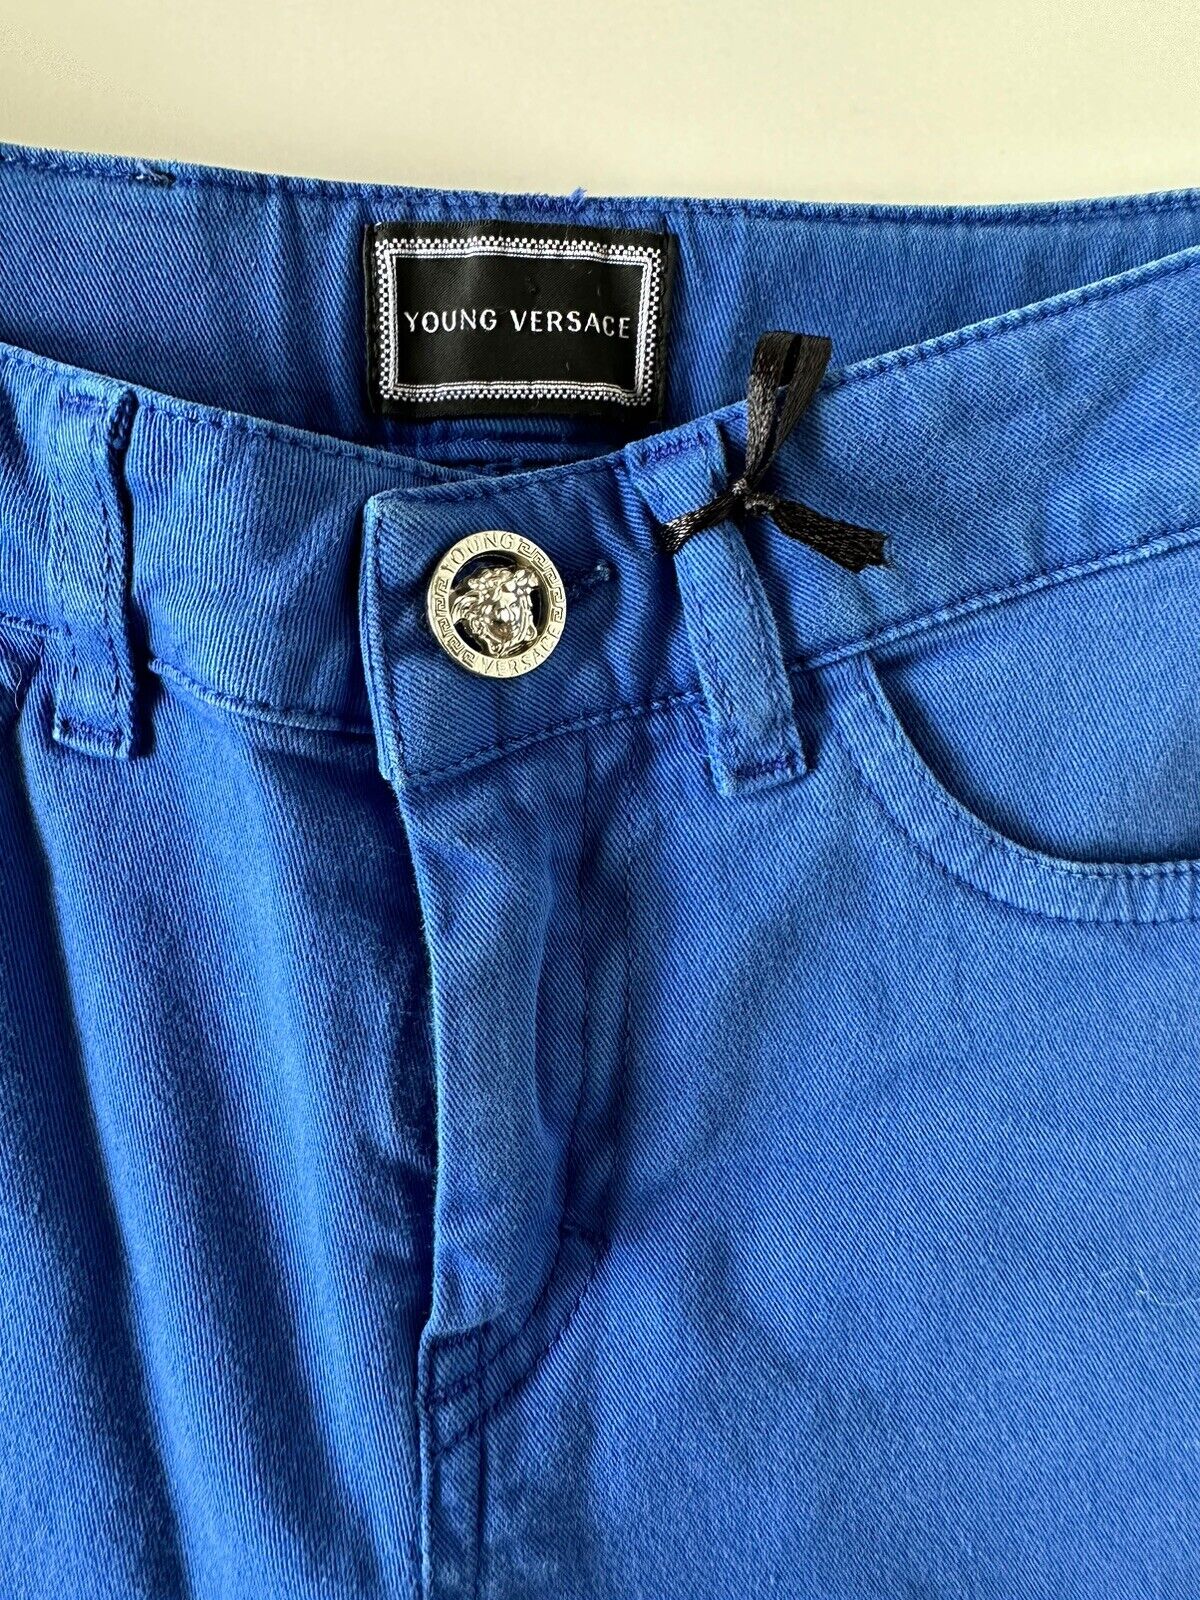 Versace Boys Blue Shorts Size 6 YVMBE66 Made in Italy NWT $290